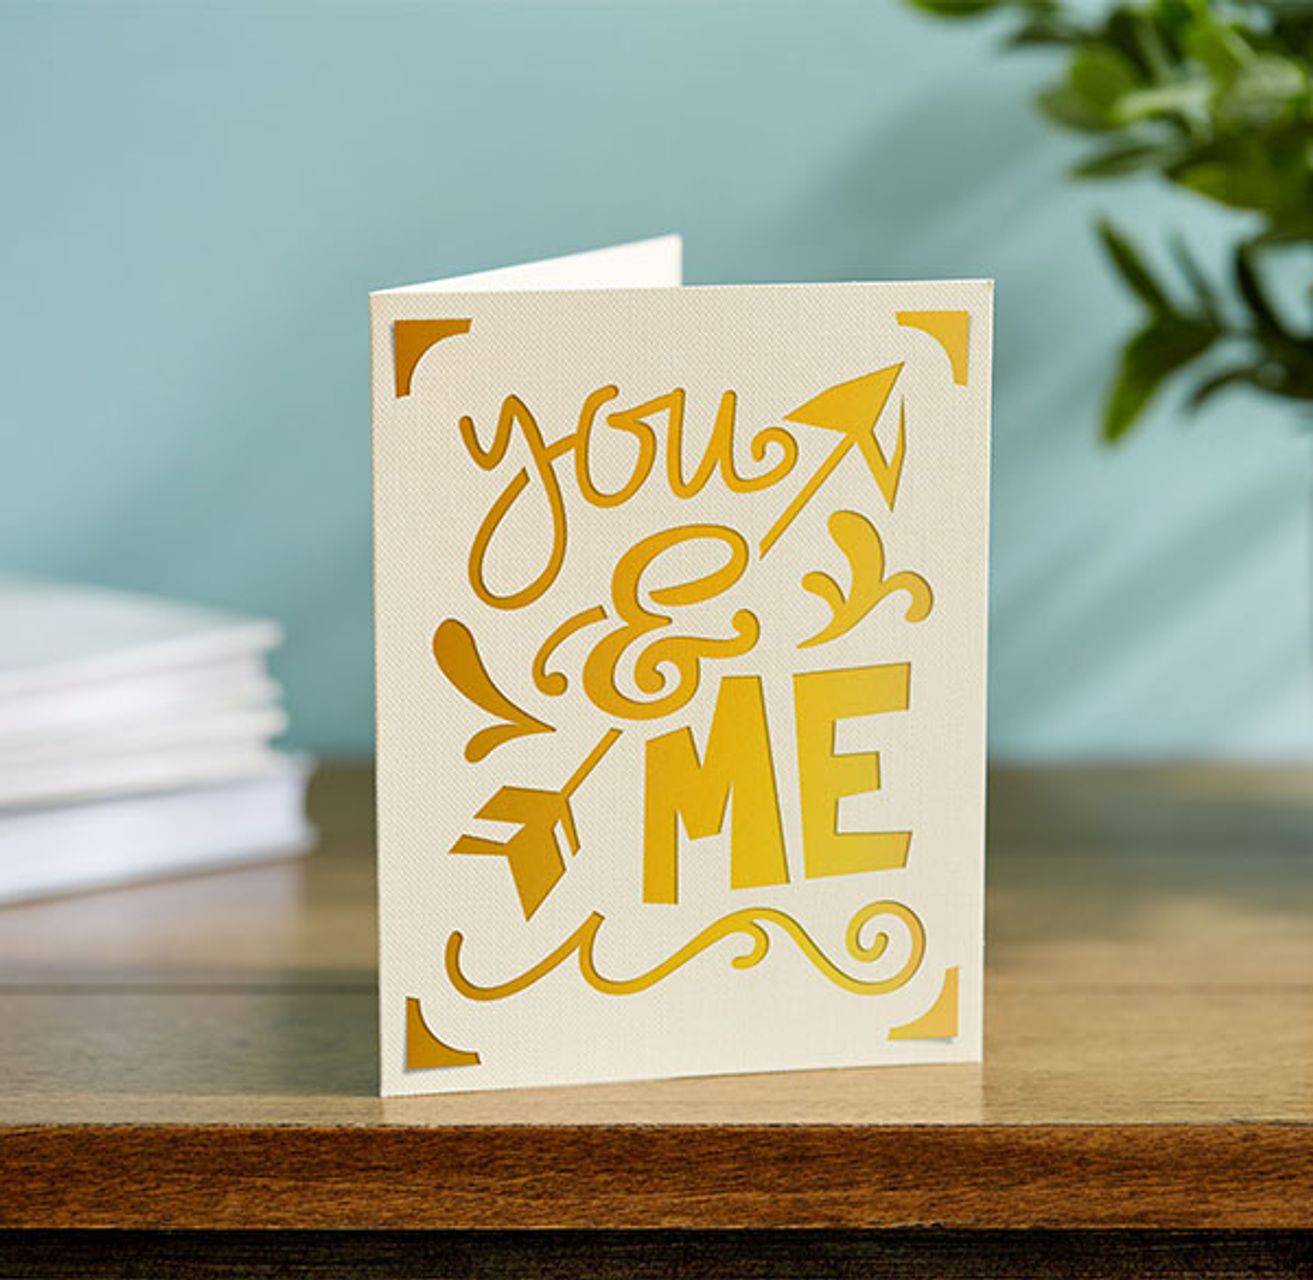 You and Me Card